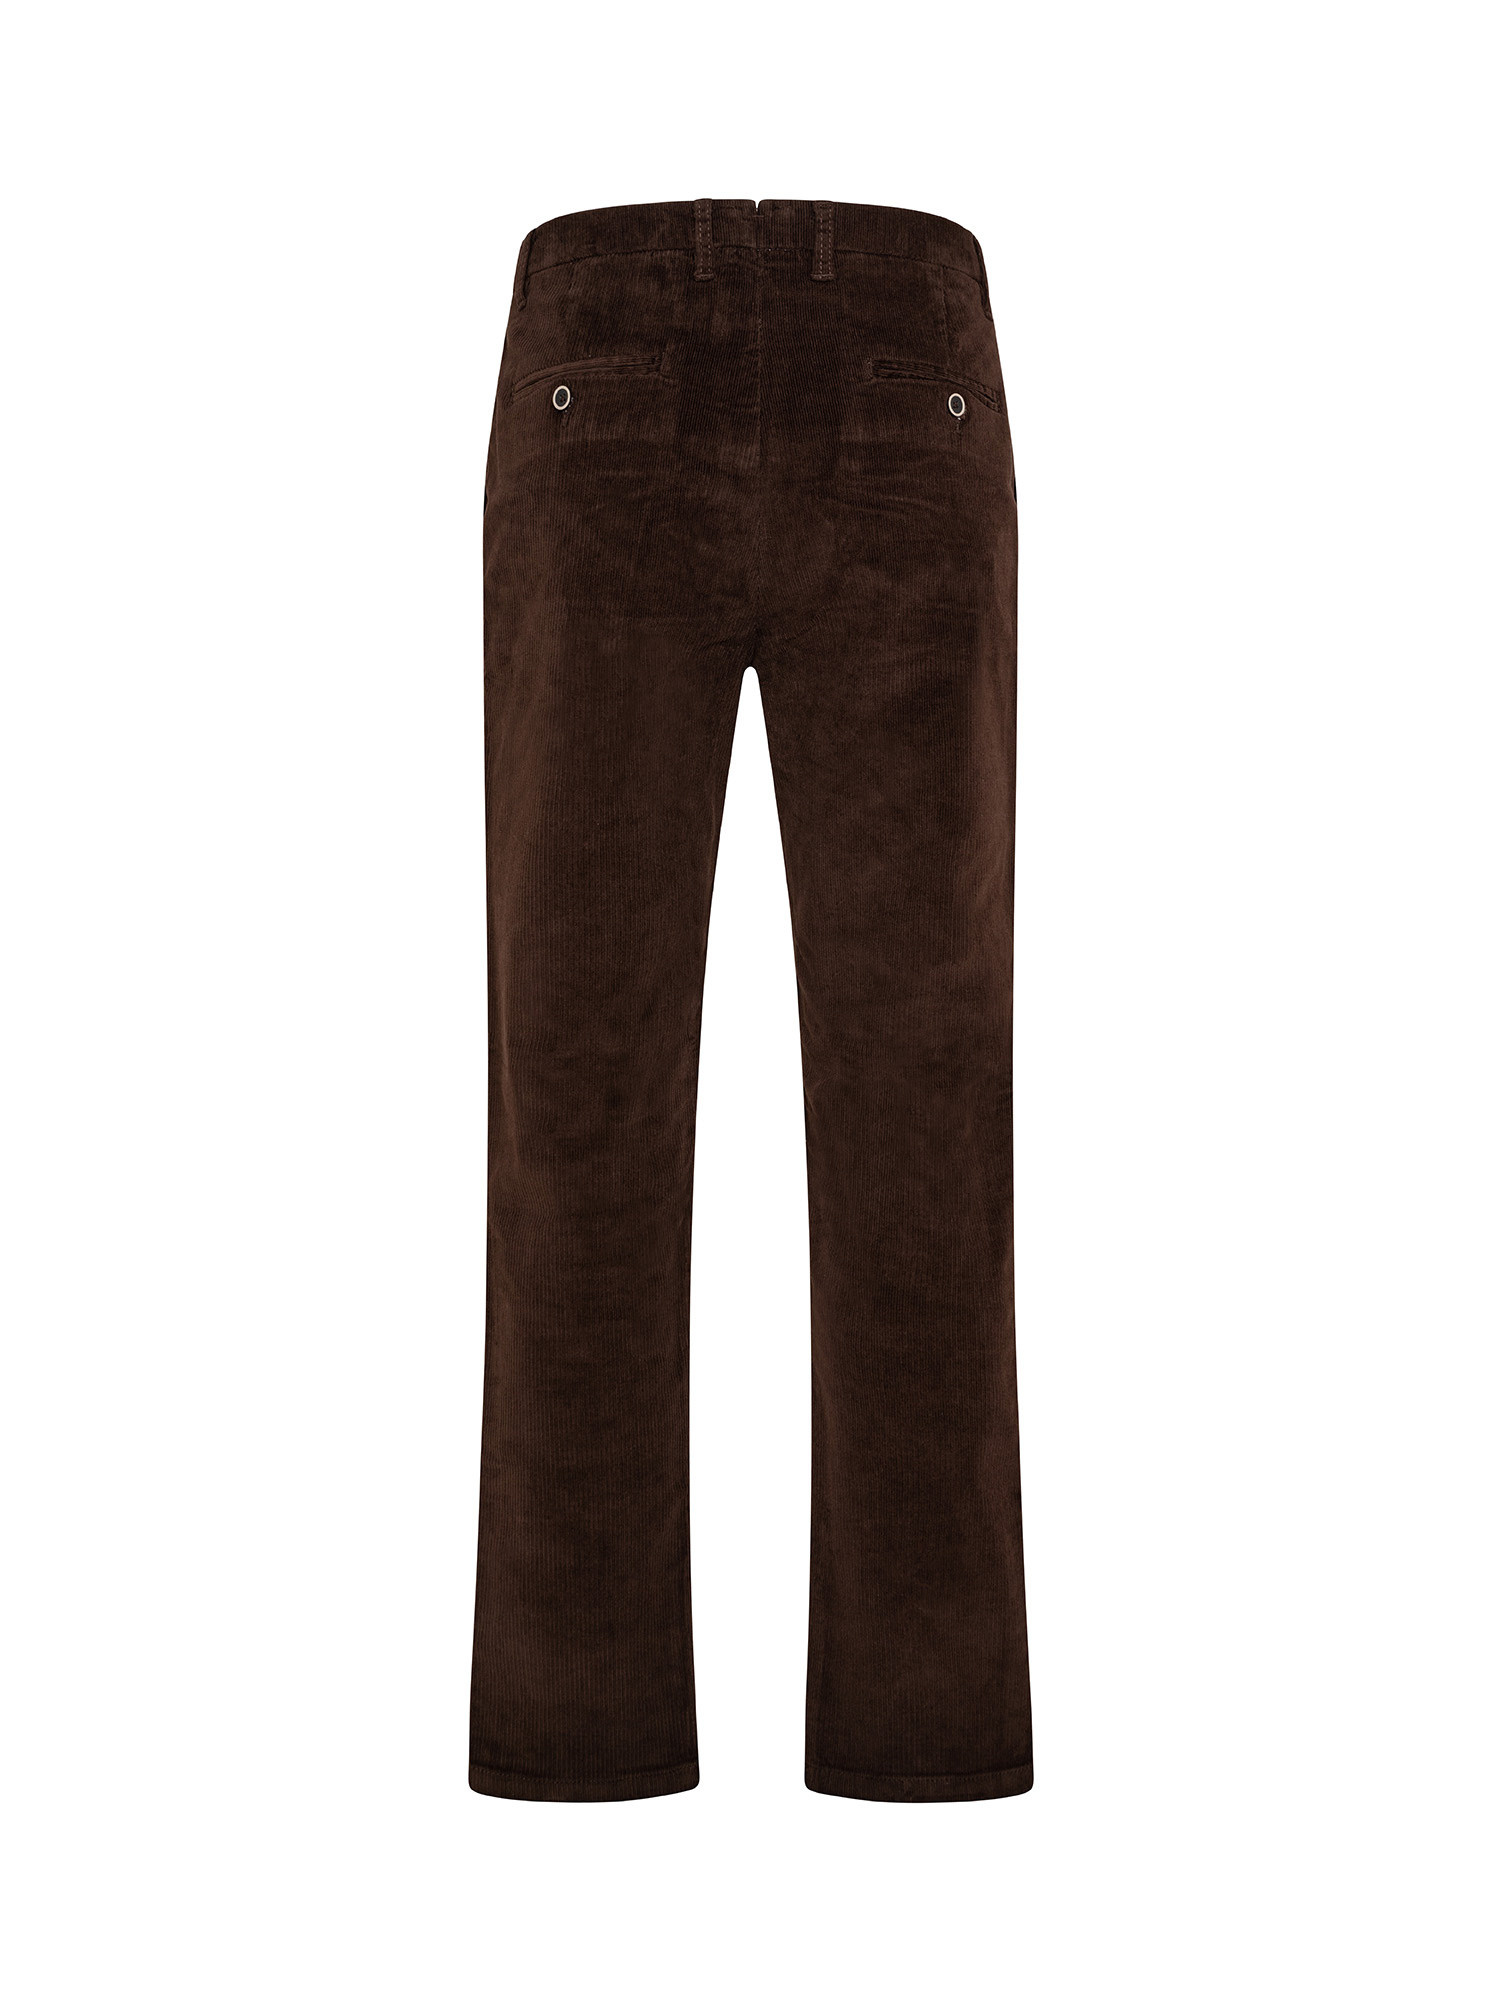 JCT - Slim fit velvet chino trousers, Brown, large image number 1